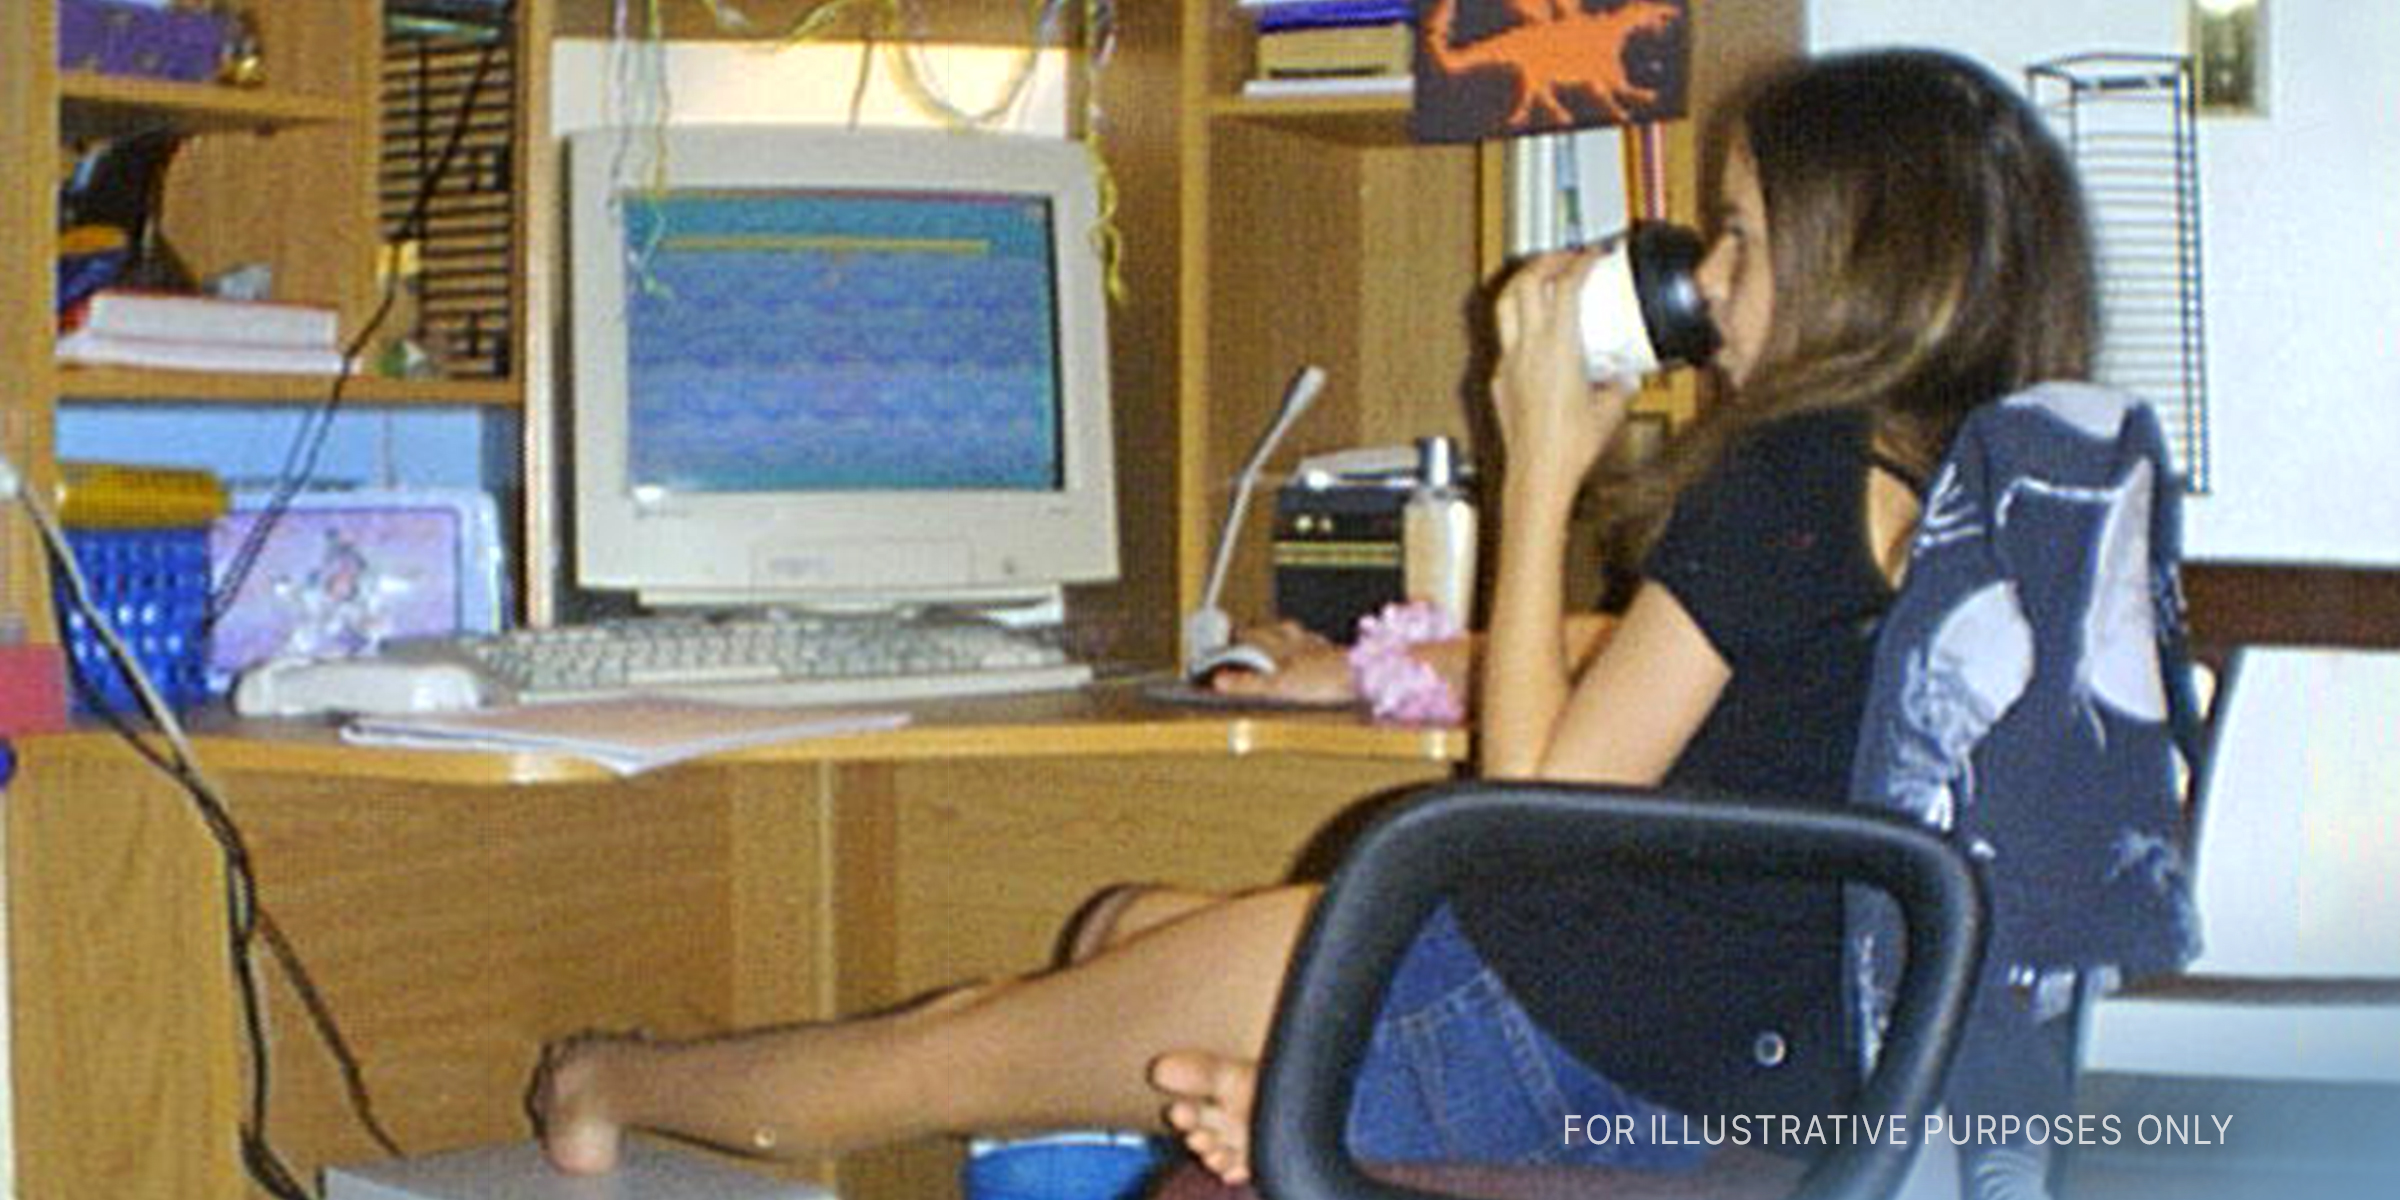 Teenage girl on the computer | Source: Flickr